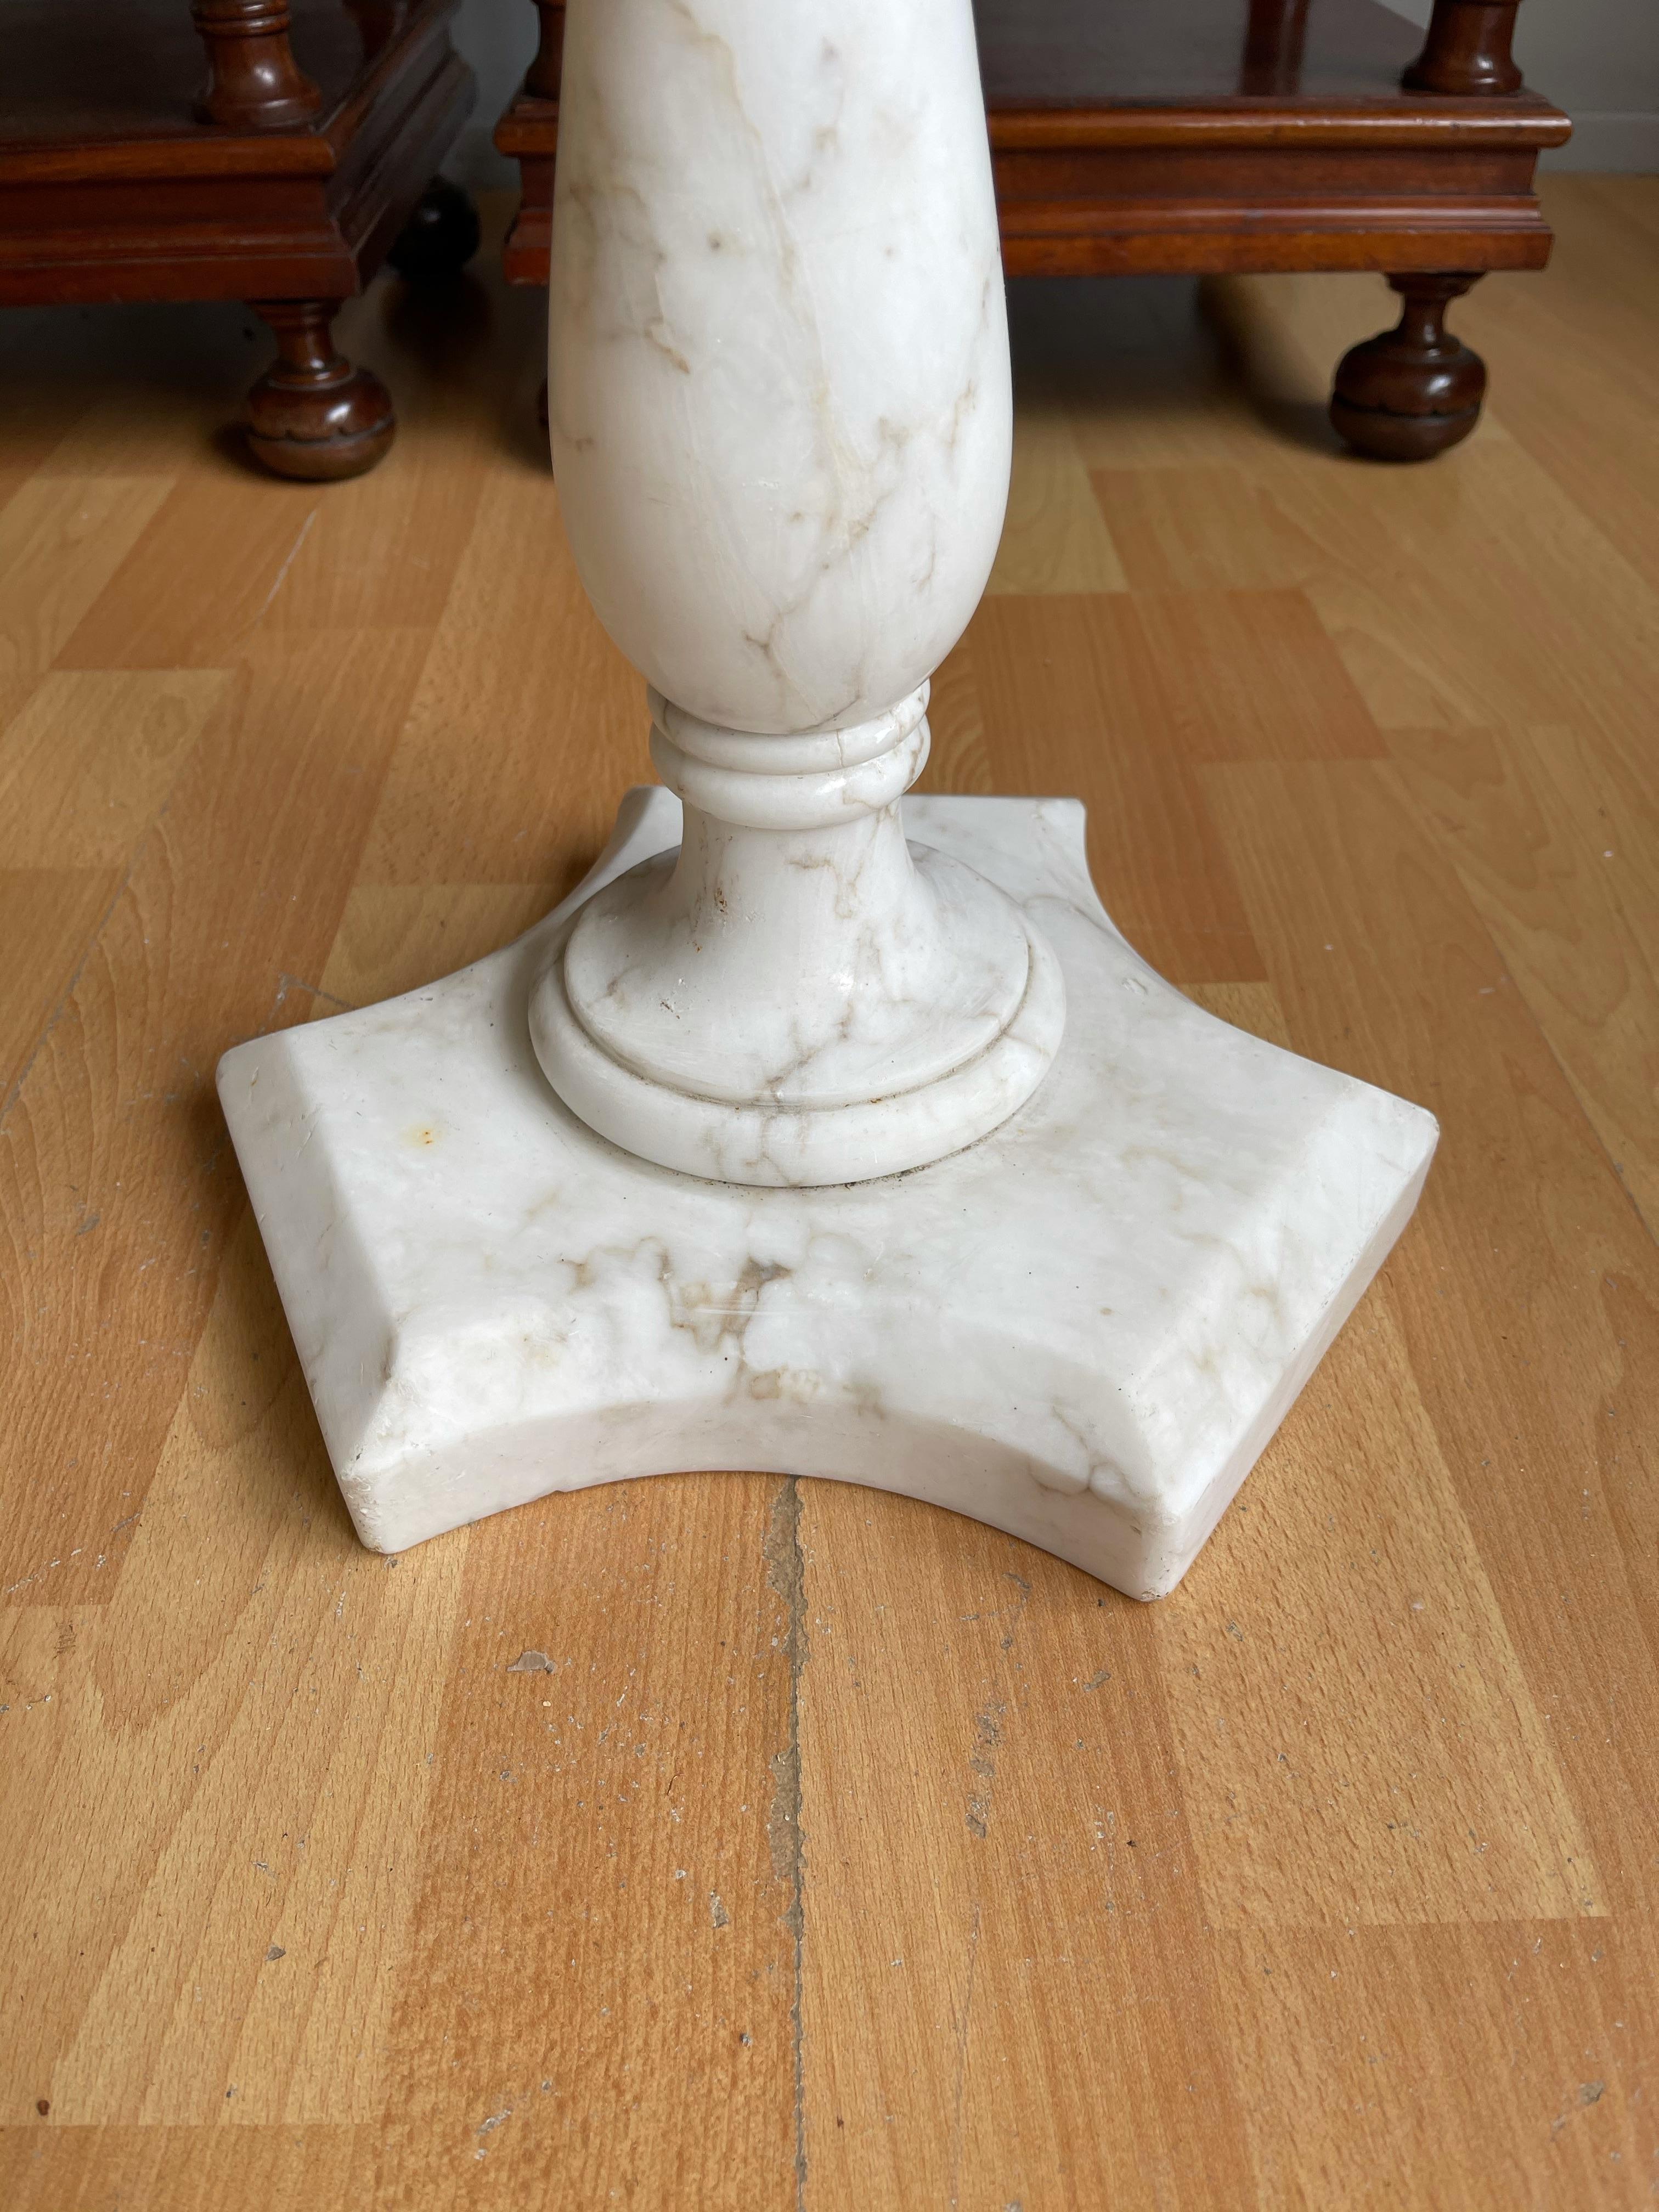 Italian Design Midcentury Modern White Carrara Marble Pedestal Stand / End Table For Sale 7